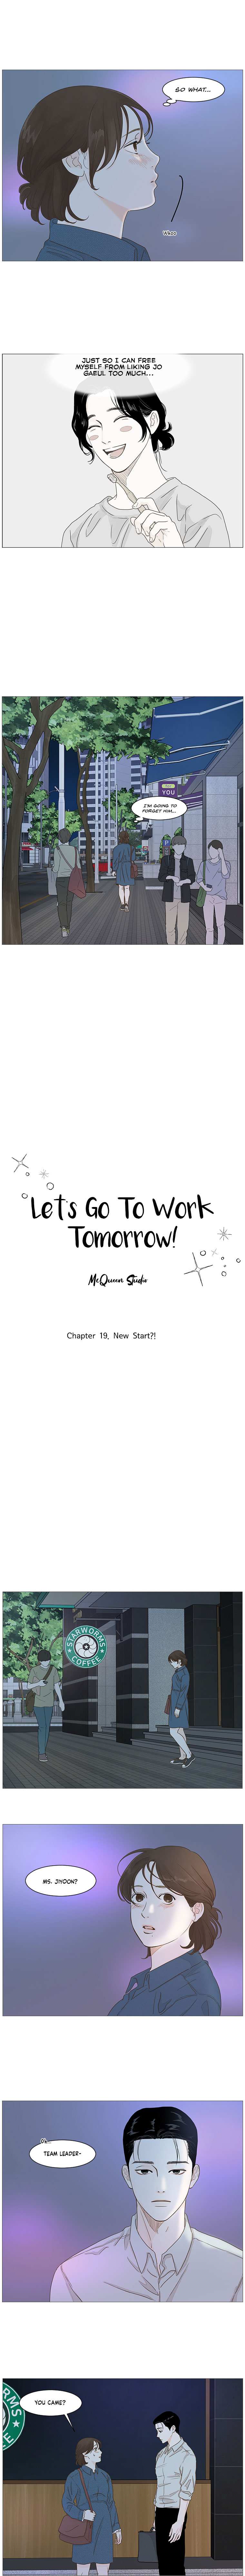 Let’s go to work tommorow! chapter 19 - page 4